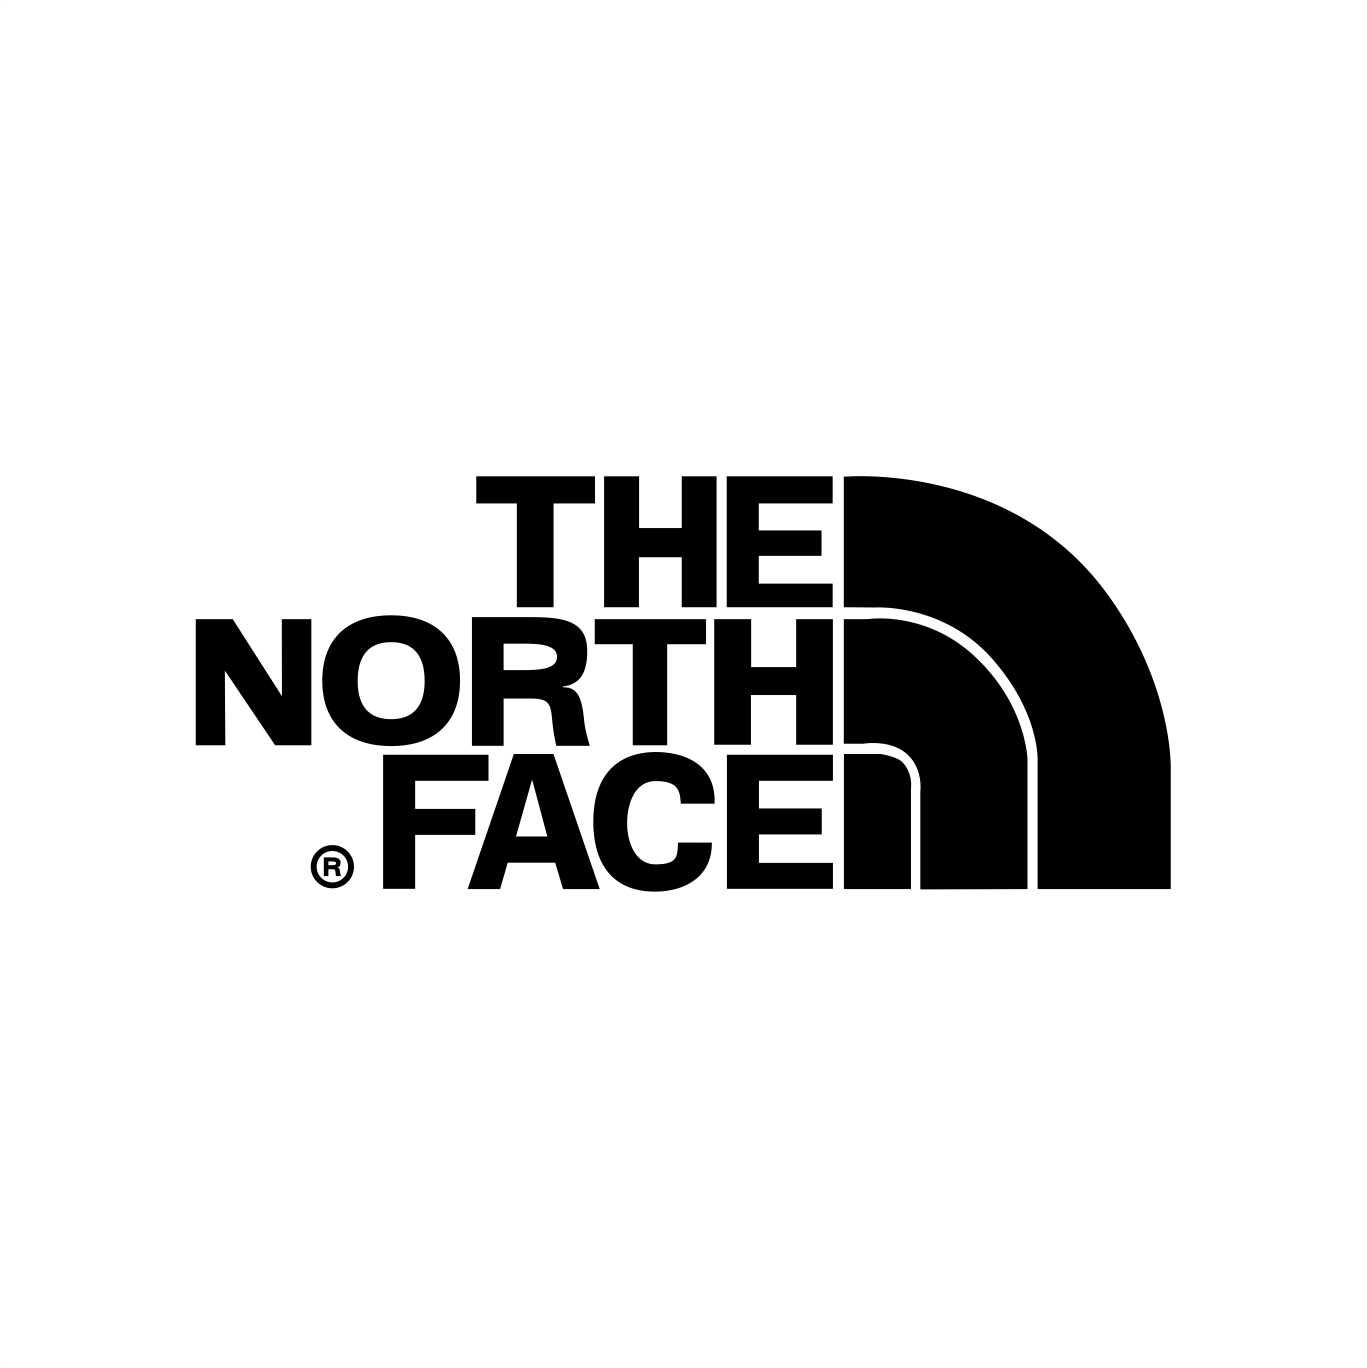 TheNorthFace.png